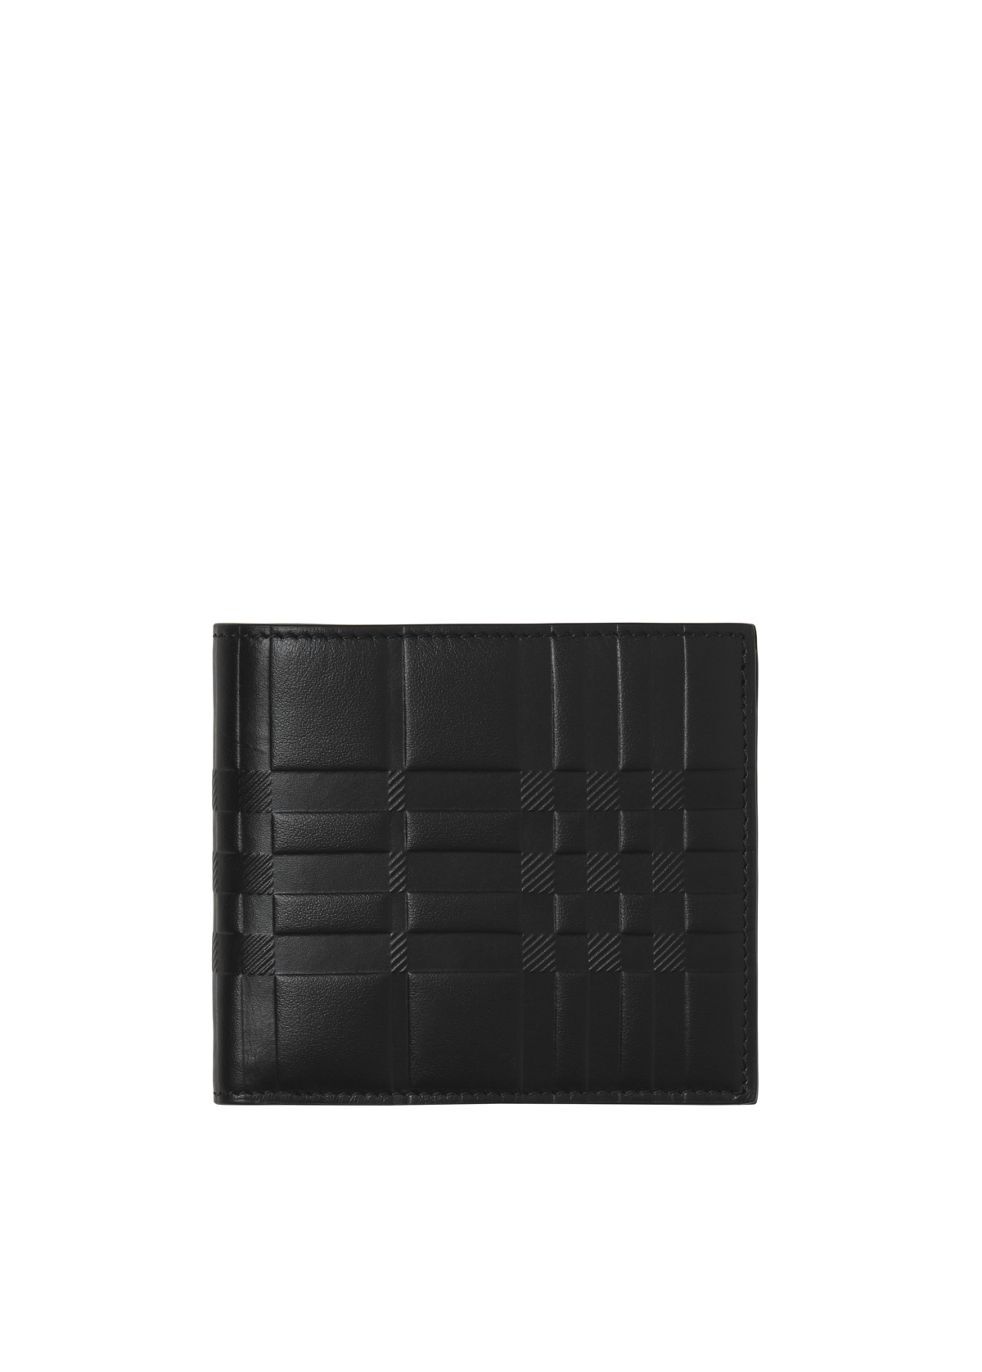 Burberry Embossed check leather bifold wallet - Harvey Nichols